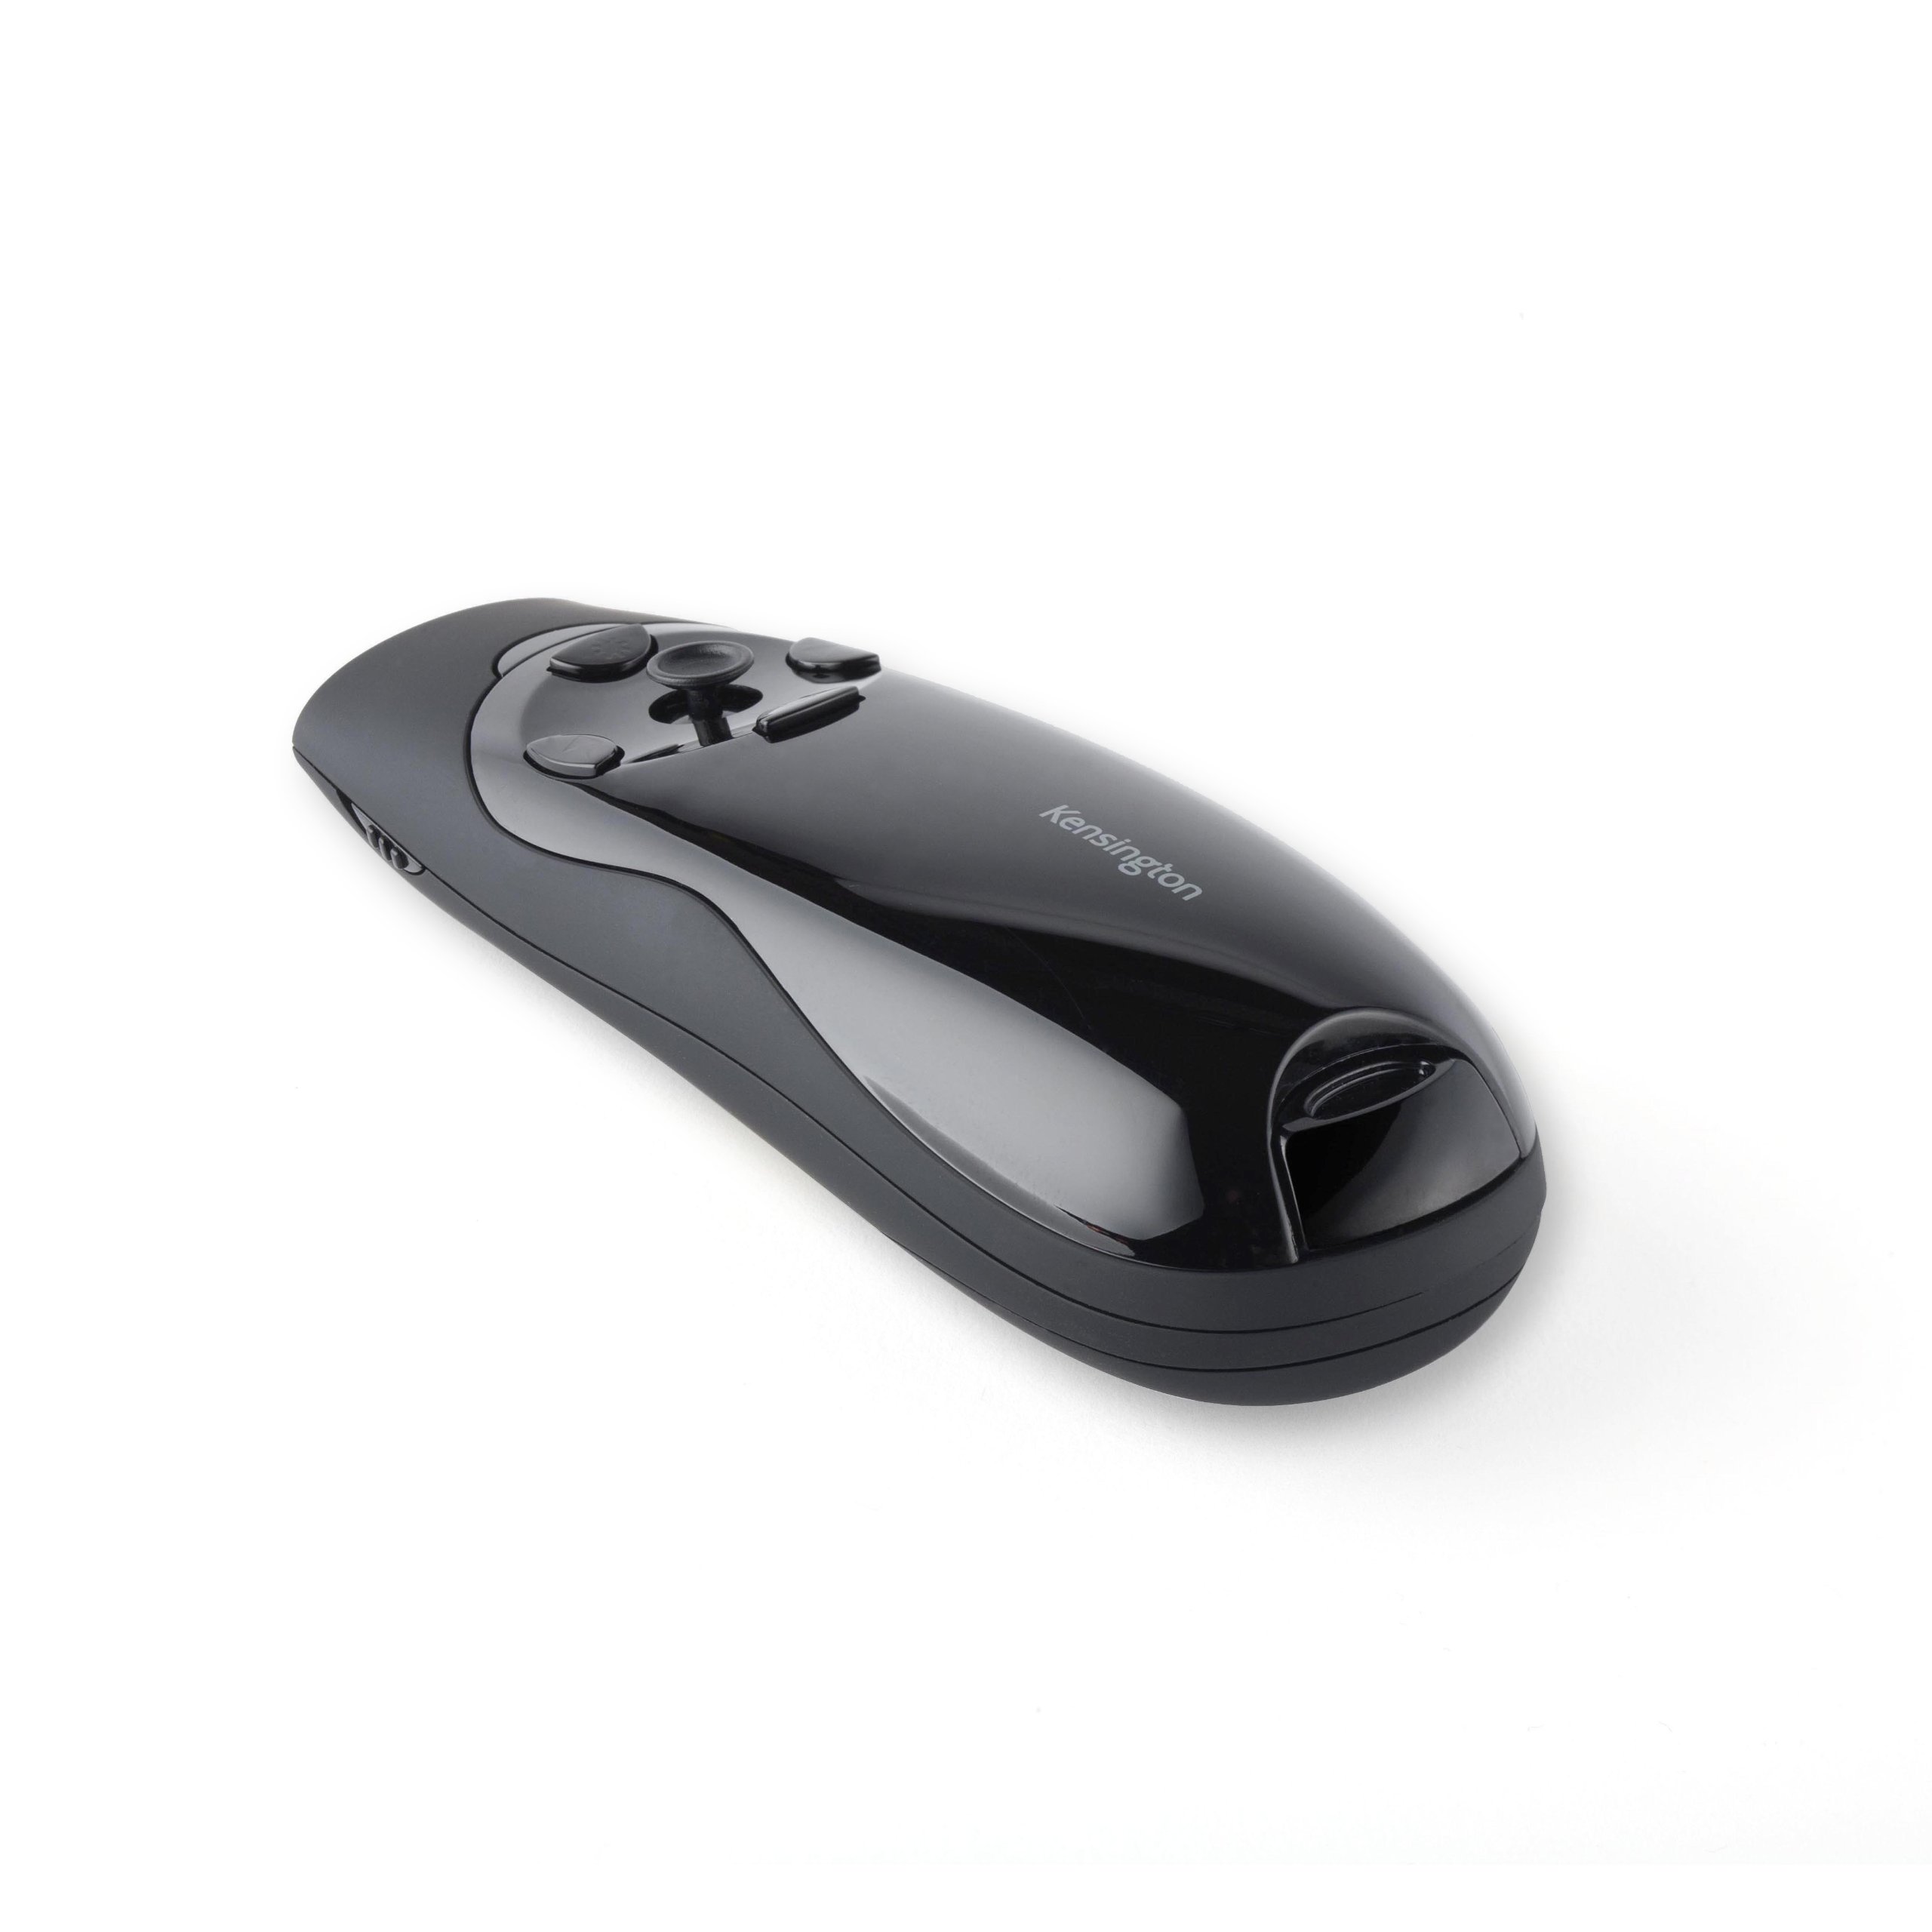 Kensington Expert Wireless Presenter with Red Laser Pointer and Cursor Control (K72425AM)